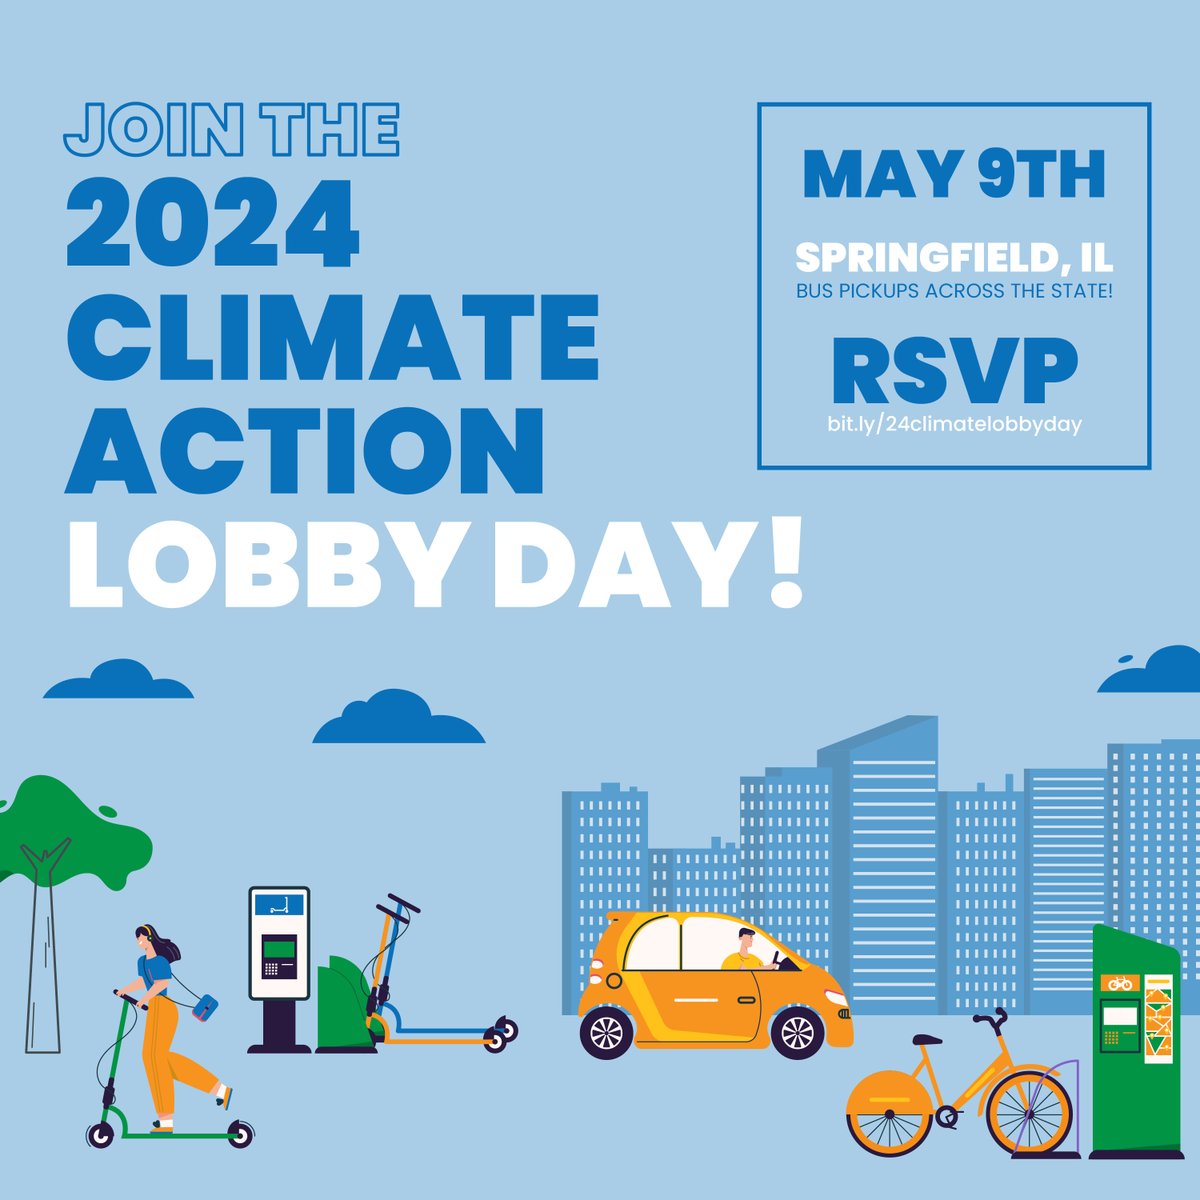 Mark your calendars: Join us in Springfield on May 9 to urge lawmakers to support the @ILCleanJobs Platform! This suite of bills will lower greenhouse gas emissions🌎, create green jobs👷‍♀️, & make our communities healthier & safer💚. RSVP ➡️ bit.ly/24climatelobby…